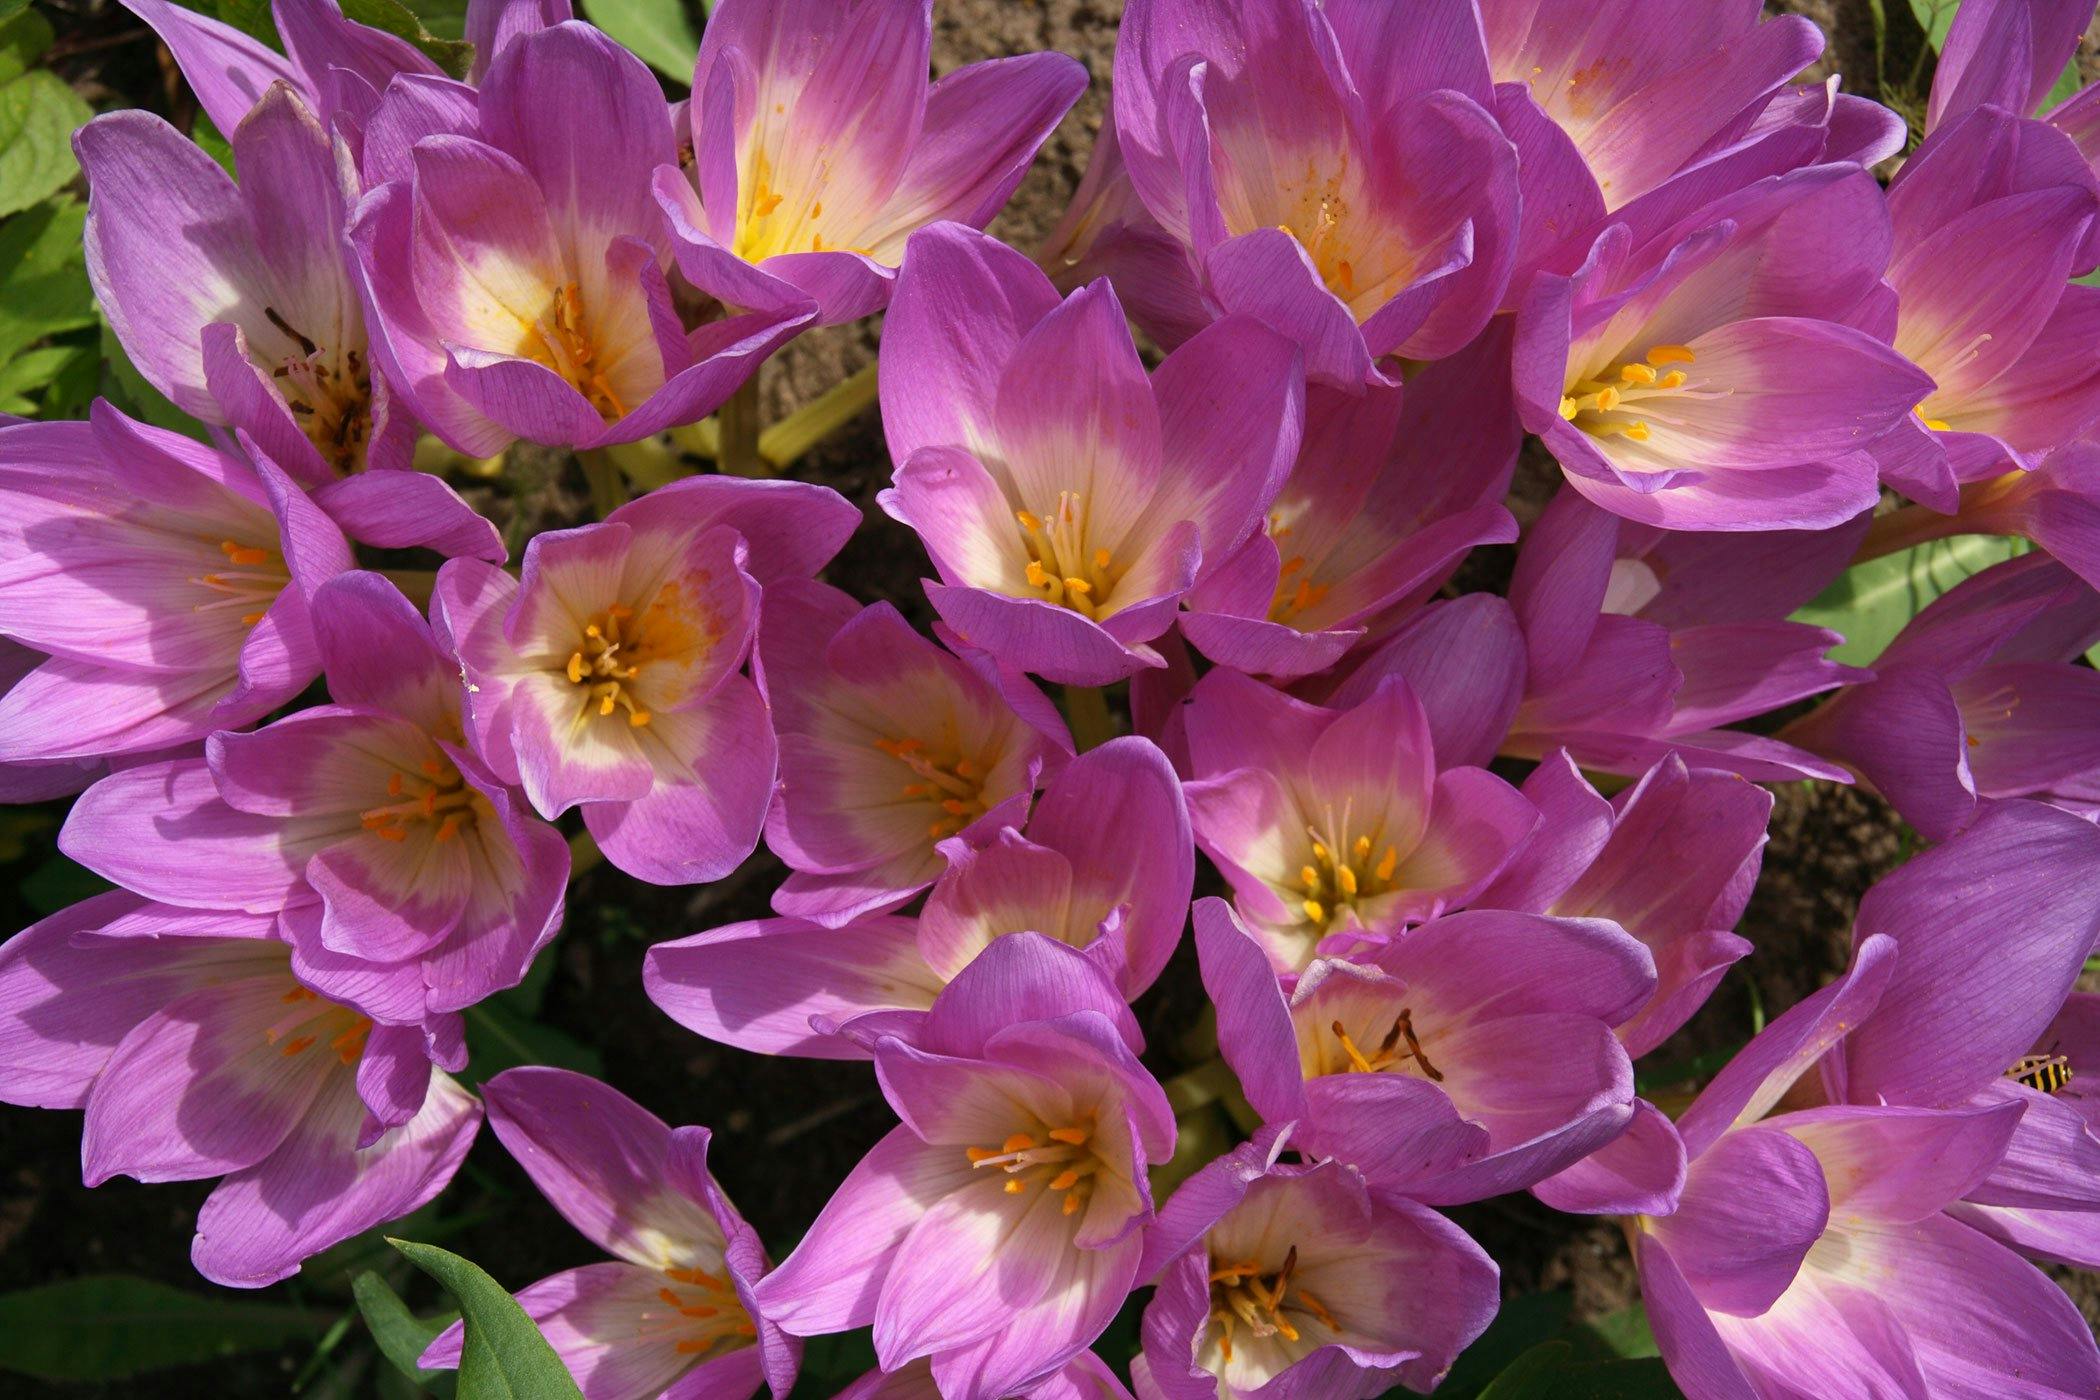 Autumn Crocus Poisoning in Dogs - Symptoms, Causes, Diagnosis, Treatment, Recovery, Management, Cost